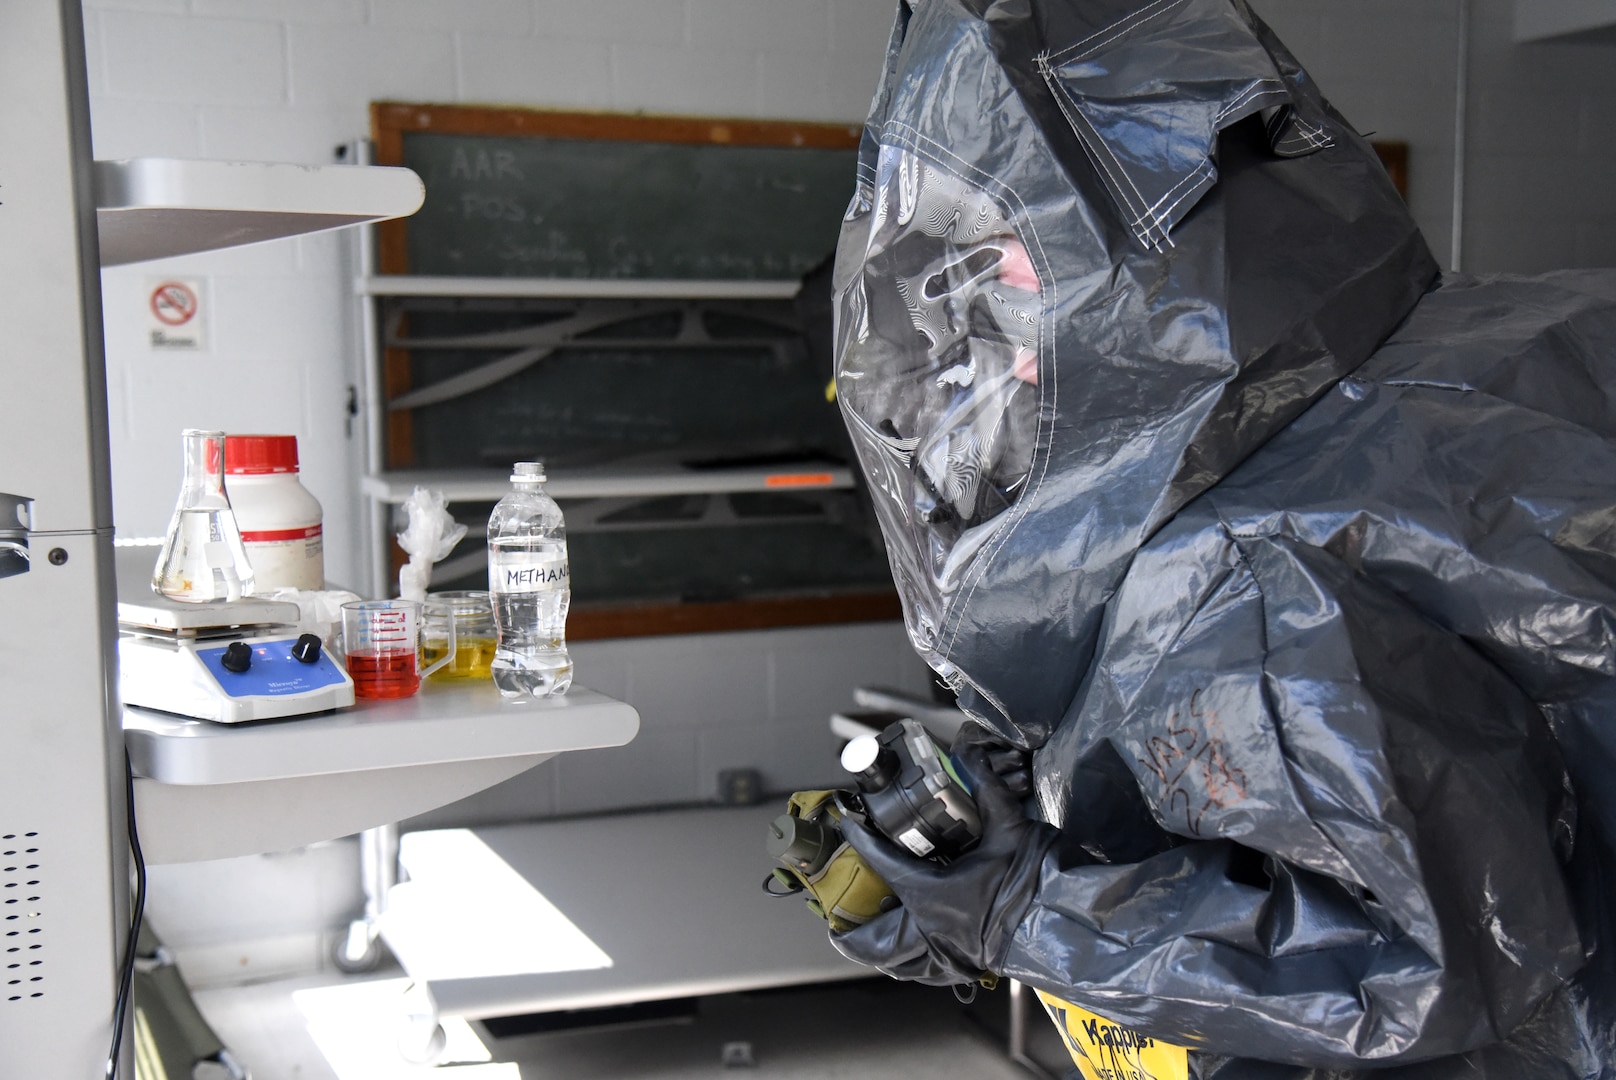 Virginia National Guard Soldiers and Airmen assigned to the Fort Pickett-based 34th Civil Support Team conduct a site assessment on a mock drug lab during a training exercise June 24, 2021, at the Manassas Readiness Center in Manassas, Virginia.